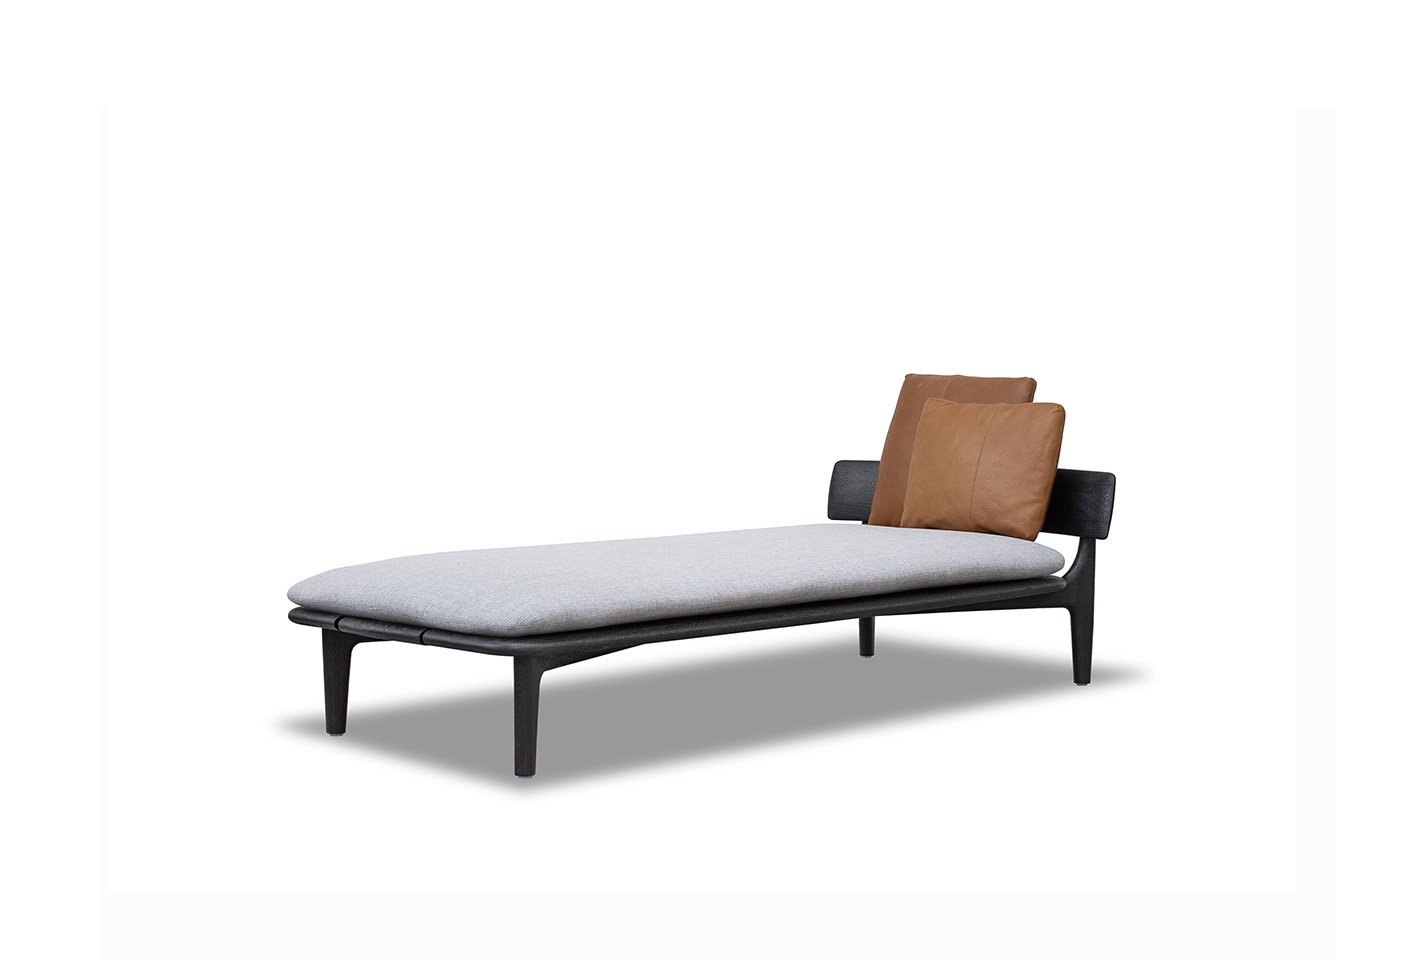 The Himba outdoor beach lounge in iroko black by by Roberto Lazzeroni for Baxter. Photo c/o Baxter.